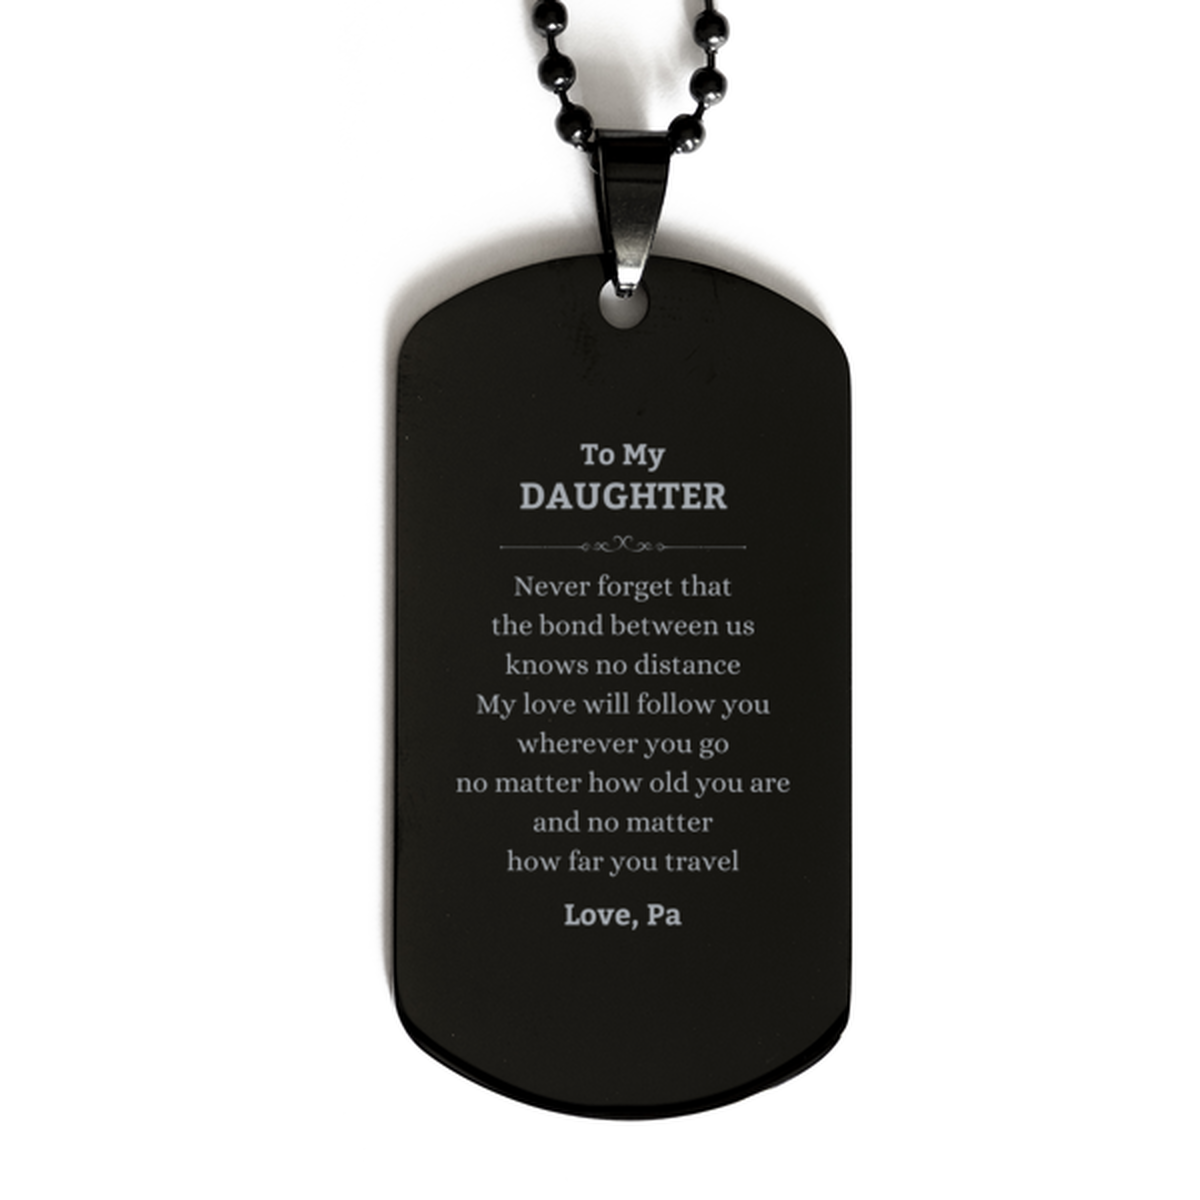 Daughter Birthday Gifts from Pa, Adjustable Black Dog Tag for Daughter Christmas Graduation Unique Gifts Daughter Never forget that the bond between us knows no distance. Love, Pa